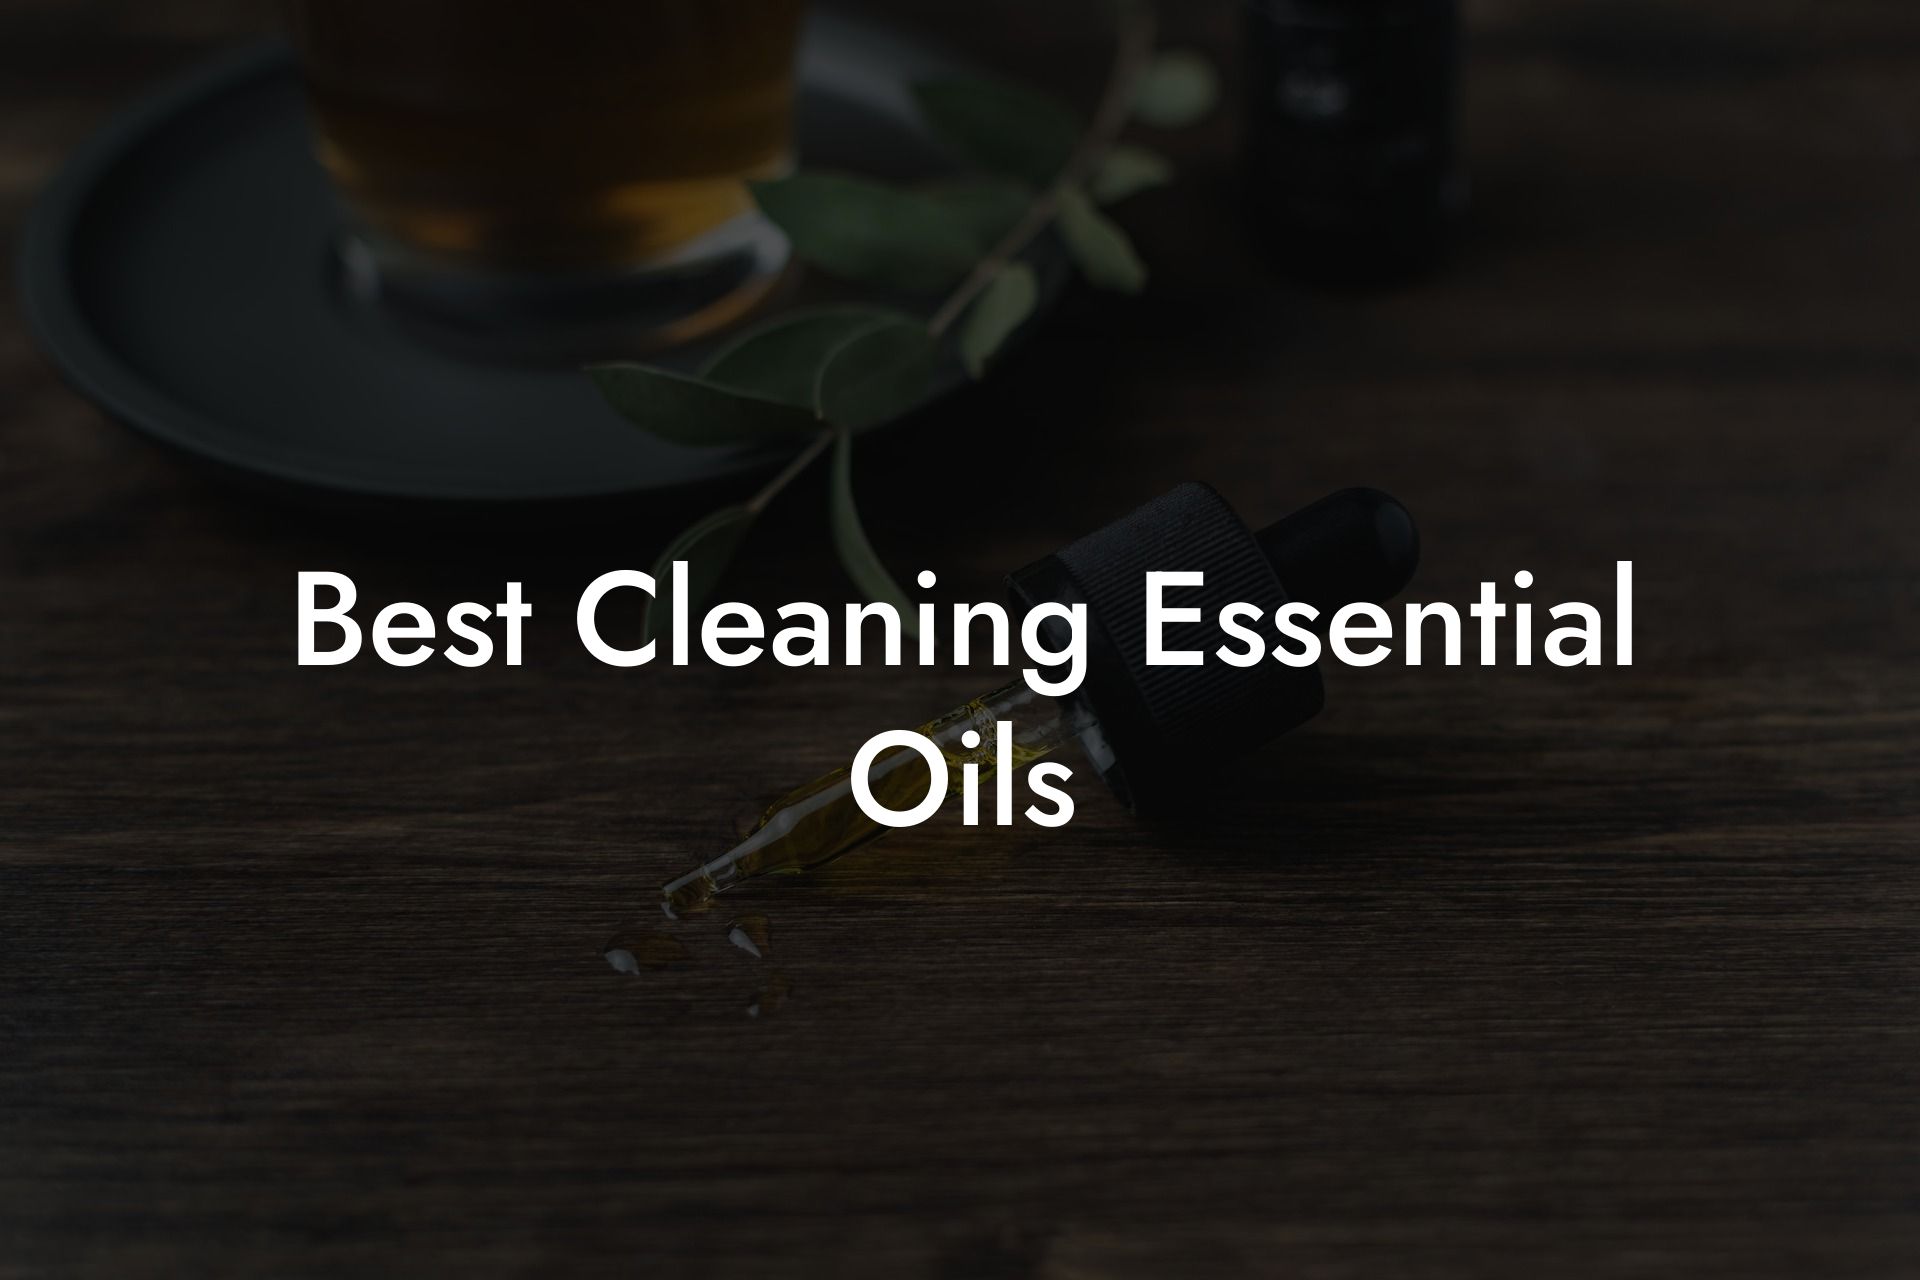 Best Cleaning Essential Oils